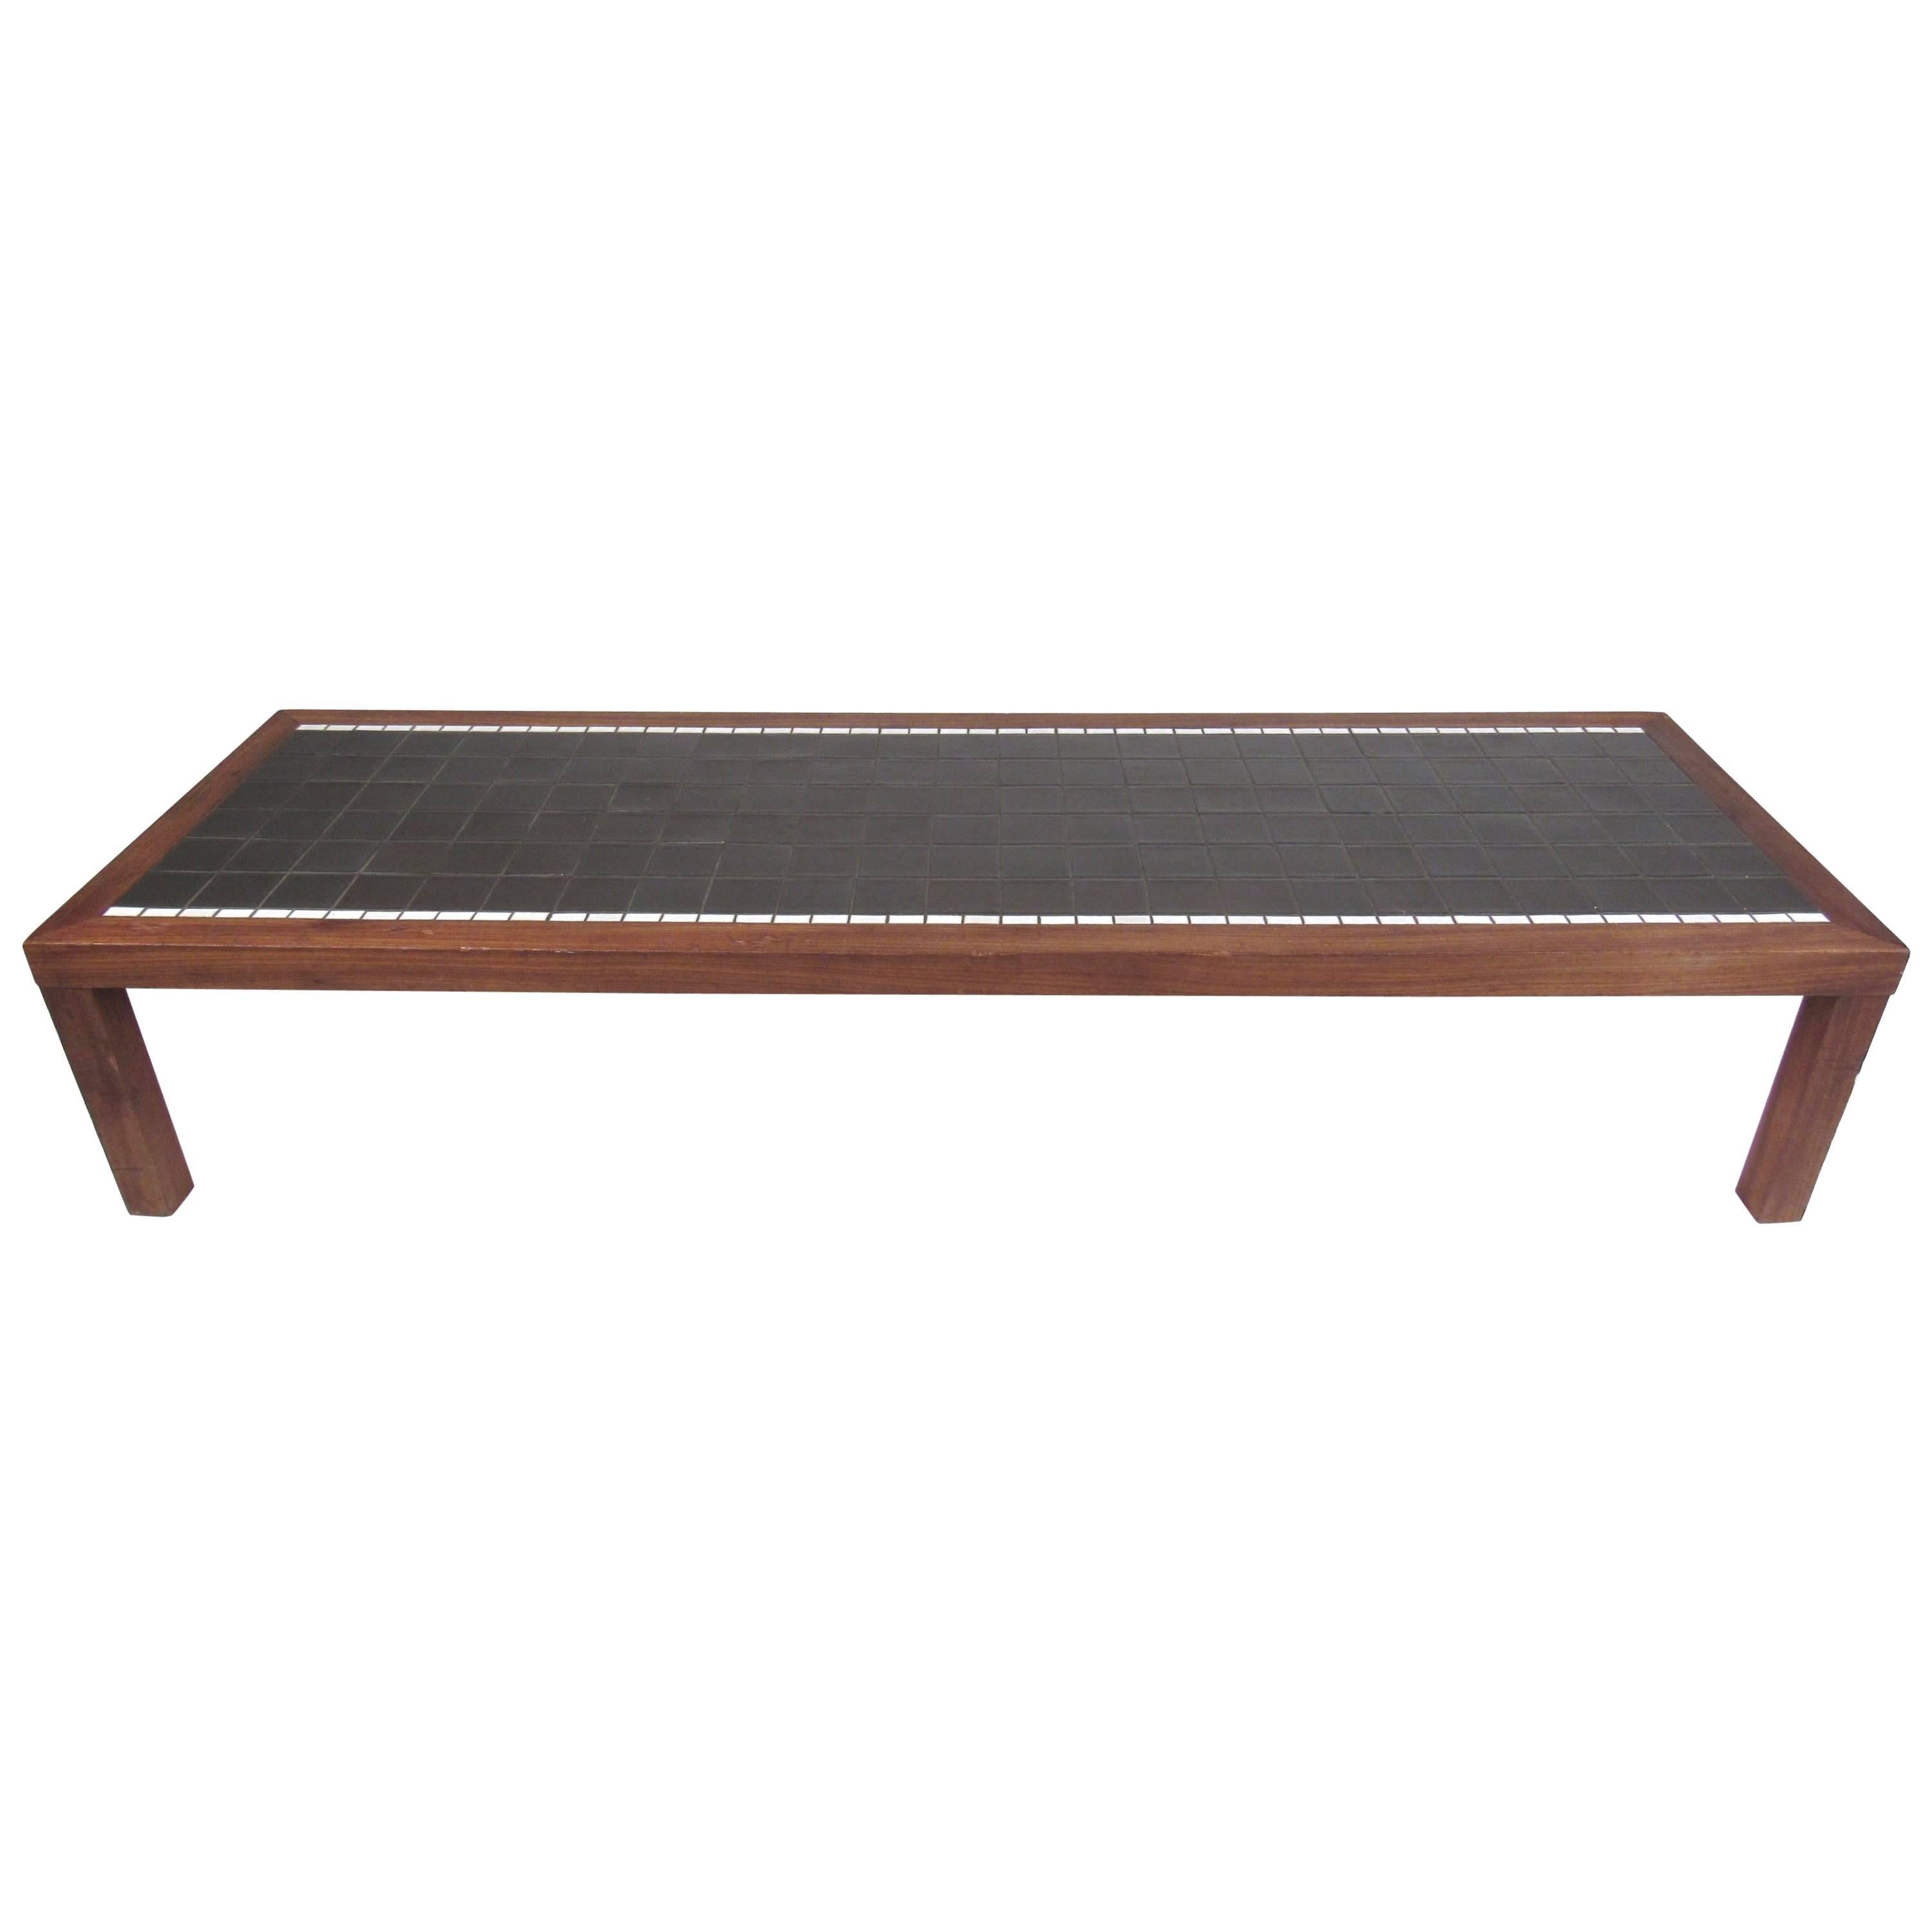 Long and Low Mid-Century Mosaic Tile Coffee Table by Gordon and Jane Martz